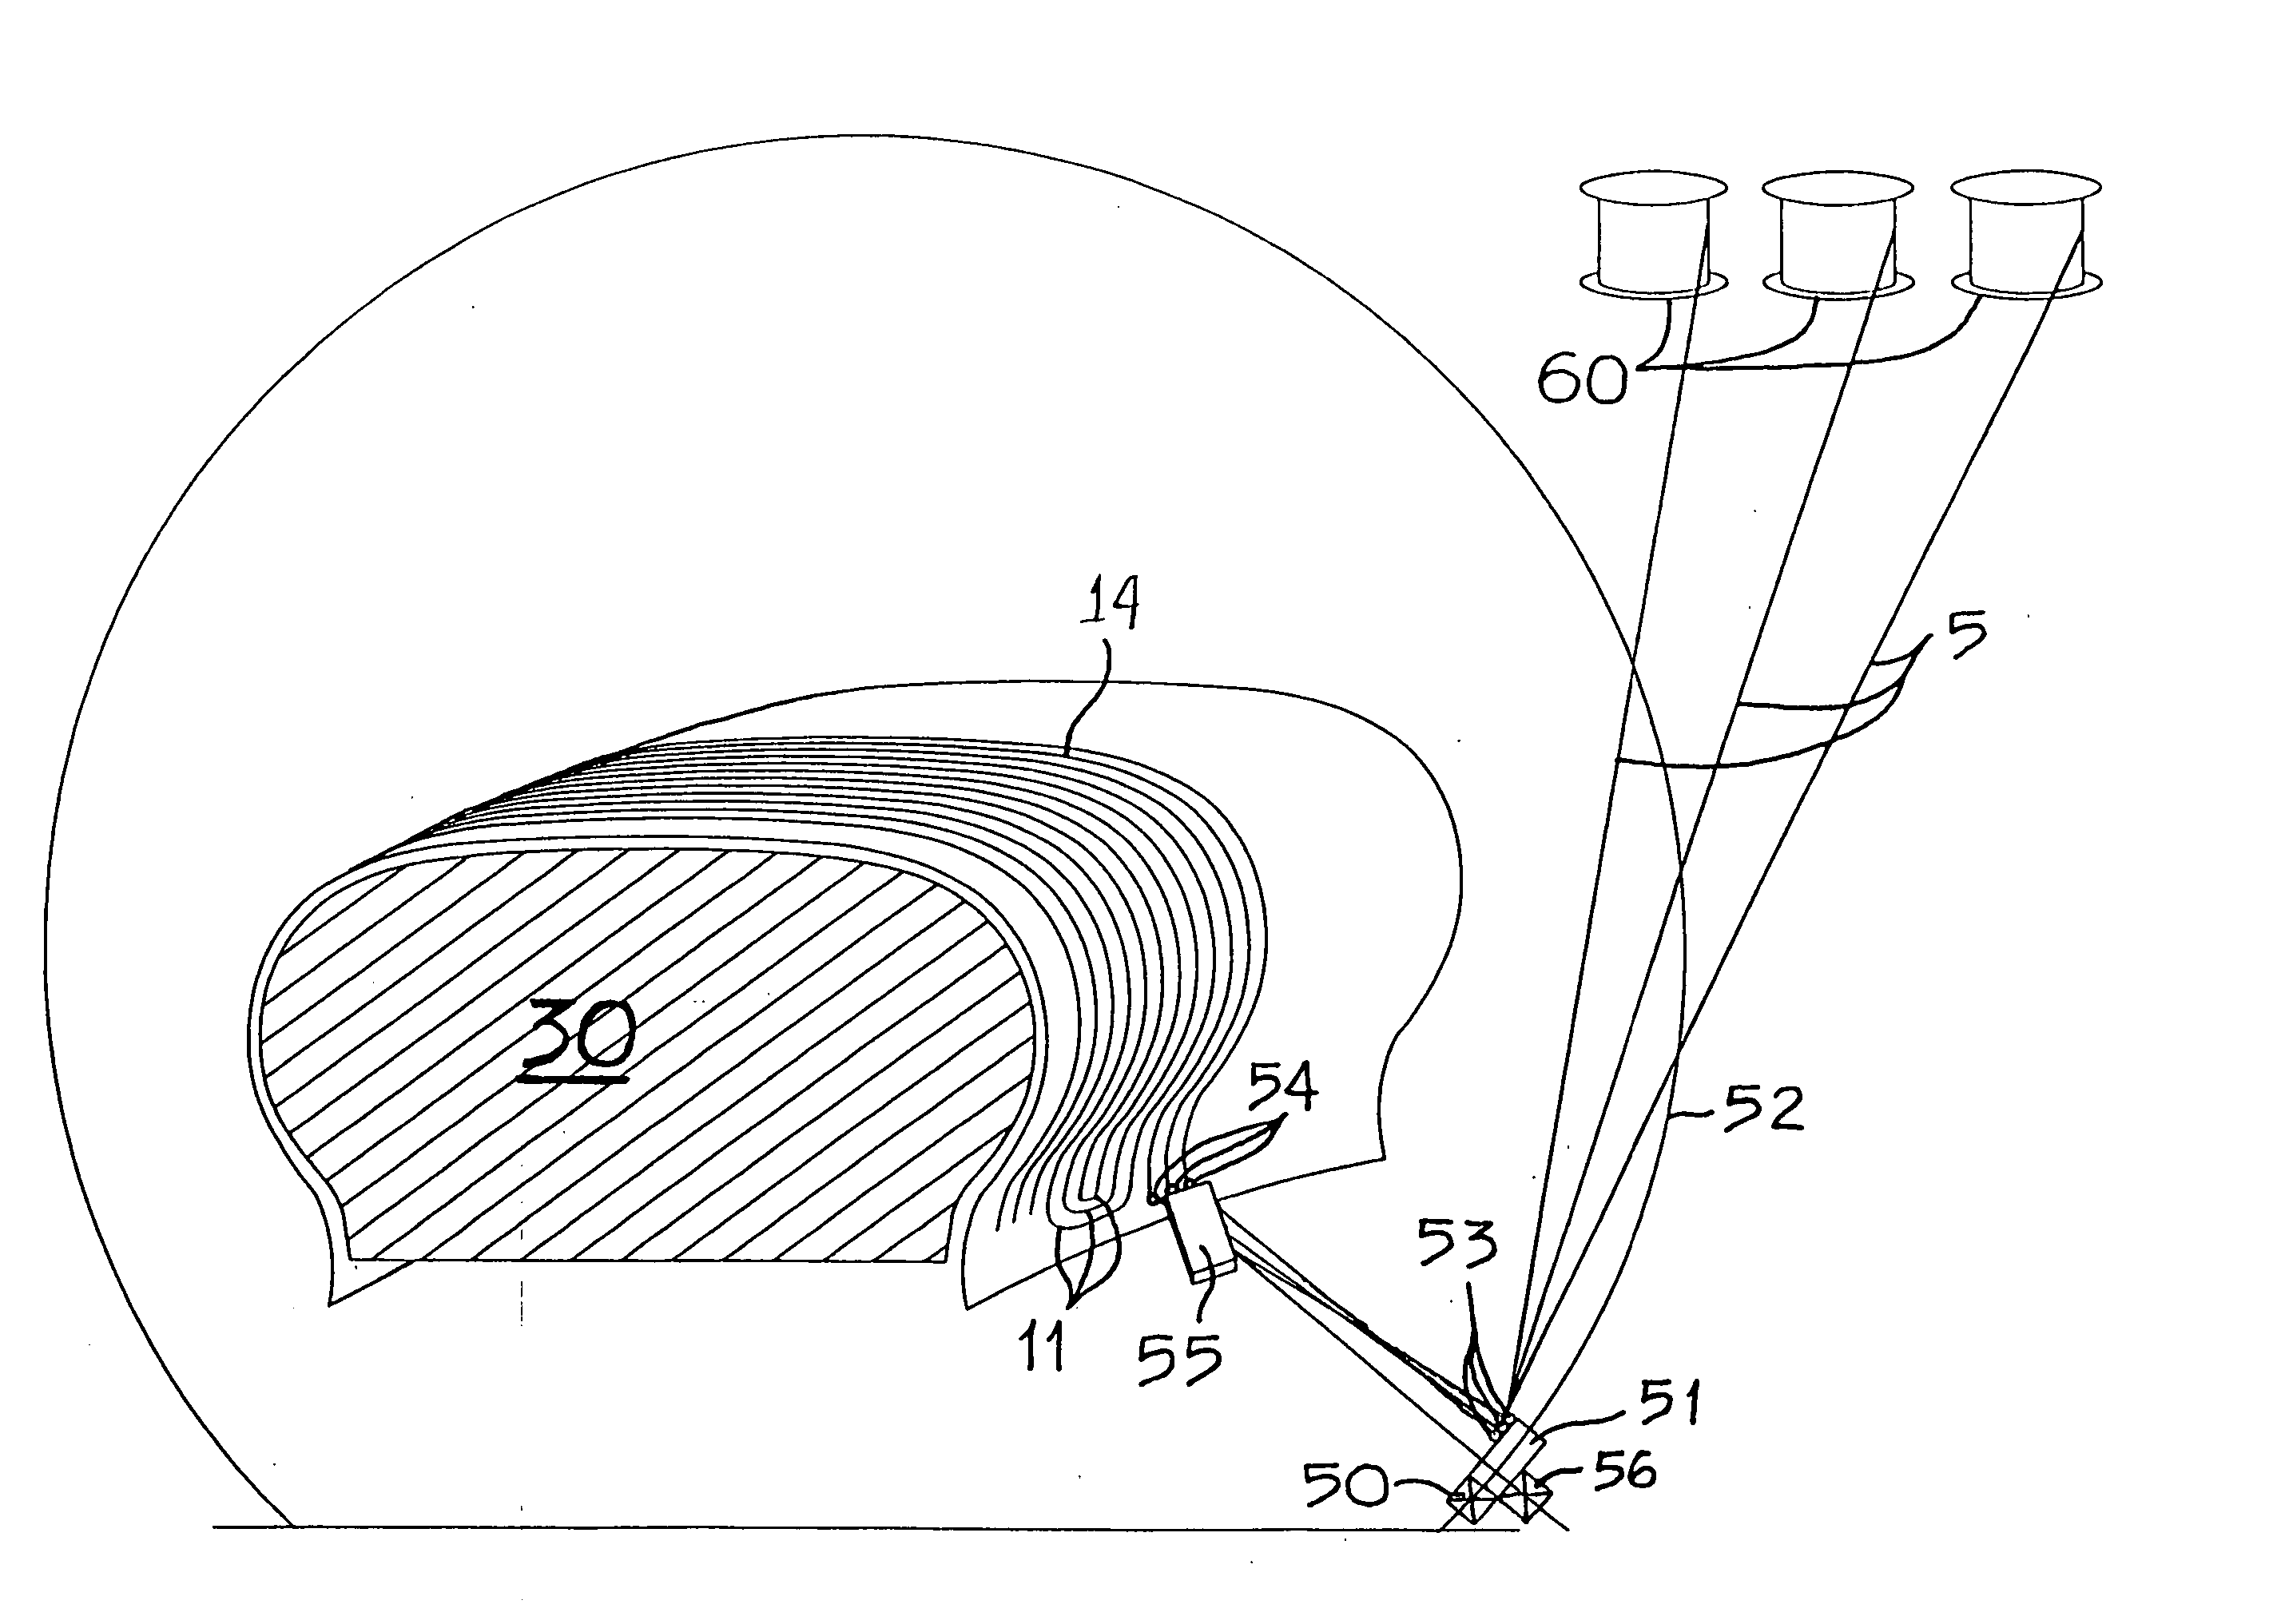 Method of laying cords of a reinforcement structure for tires